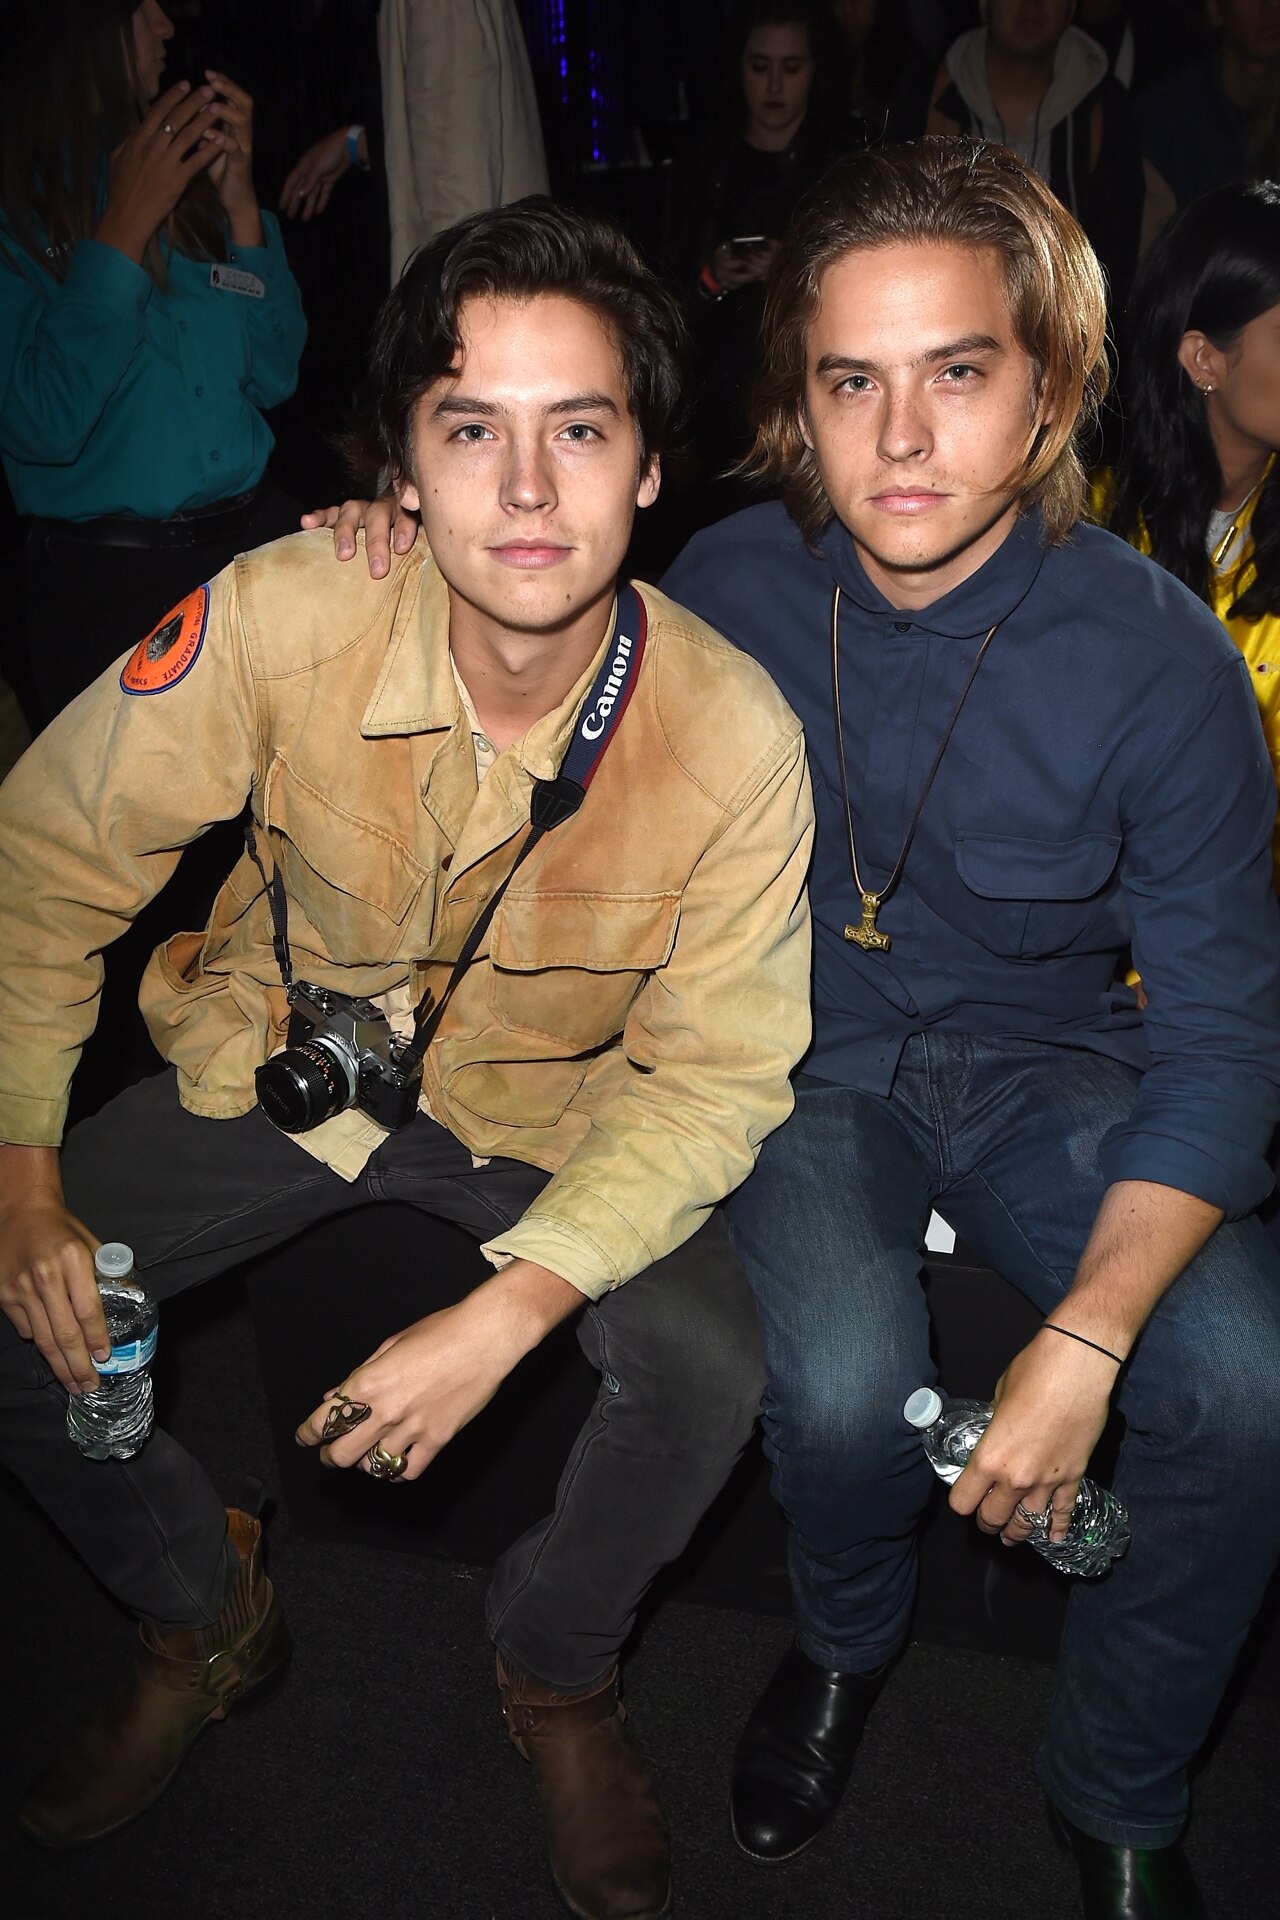 <h2>Cole and Dylan Sprouse</h2><p>Long before they rose to fame for their roles in Disney’s <em>The Suite Life of Zack and Cody</em>, Cole and Dylan Sprouse played Justin in the <em><a href="http://www.imdb.com/title/tt0282589/" target="_blank" rel="noopener">I Saw Mommy Kissing Santa Claus</a>, </em>a 2001 film adaption of a song of the same name. The movie seemed to miss the mark, as it was aimed at children yet debunked the belief in Santa Claus—receiving poor reviews as a result.</p>